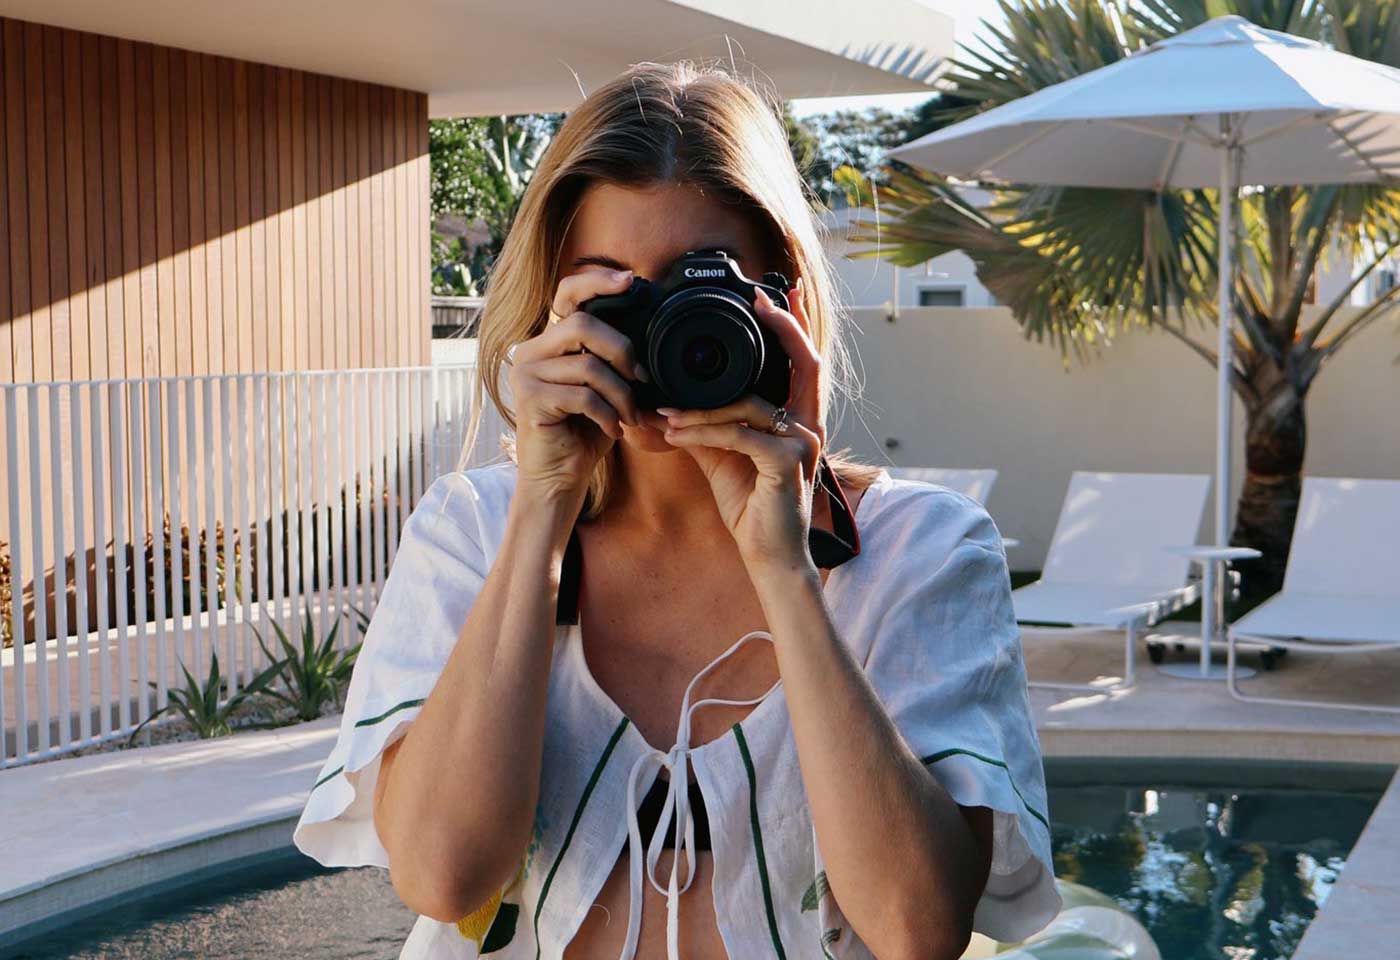 Ellie Watson with a Canon EOS camera